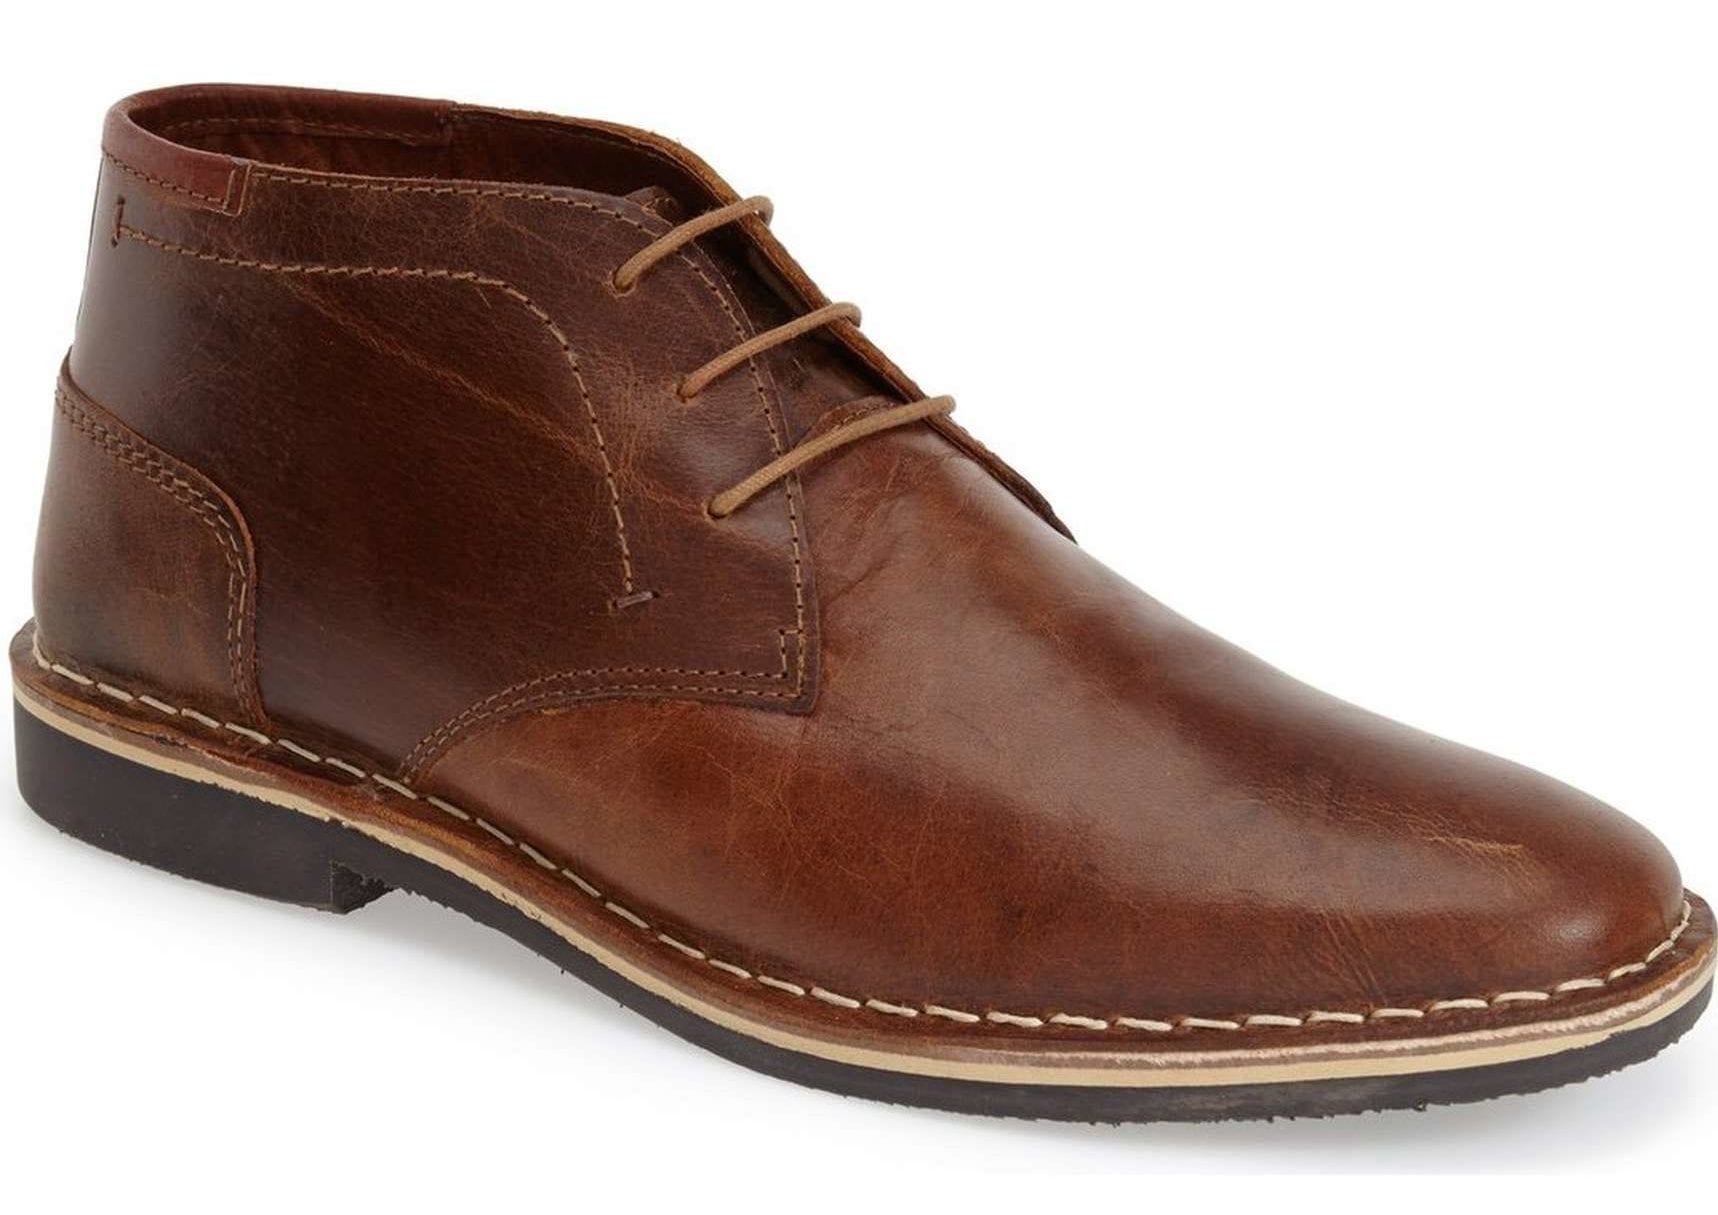 10 Best Mens Desert Boots for 2019 - New Chukka Boots and Clarks in ...